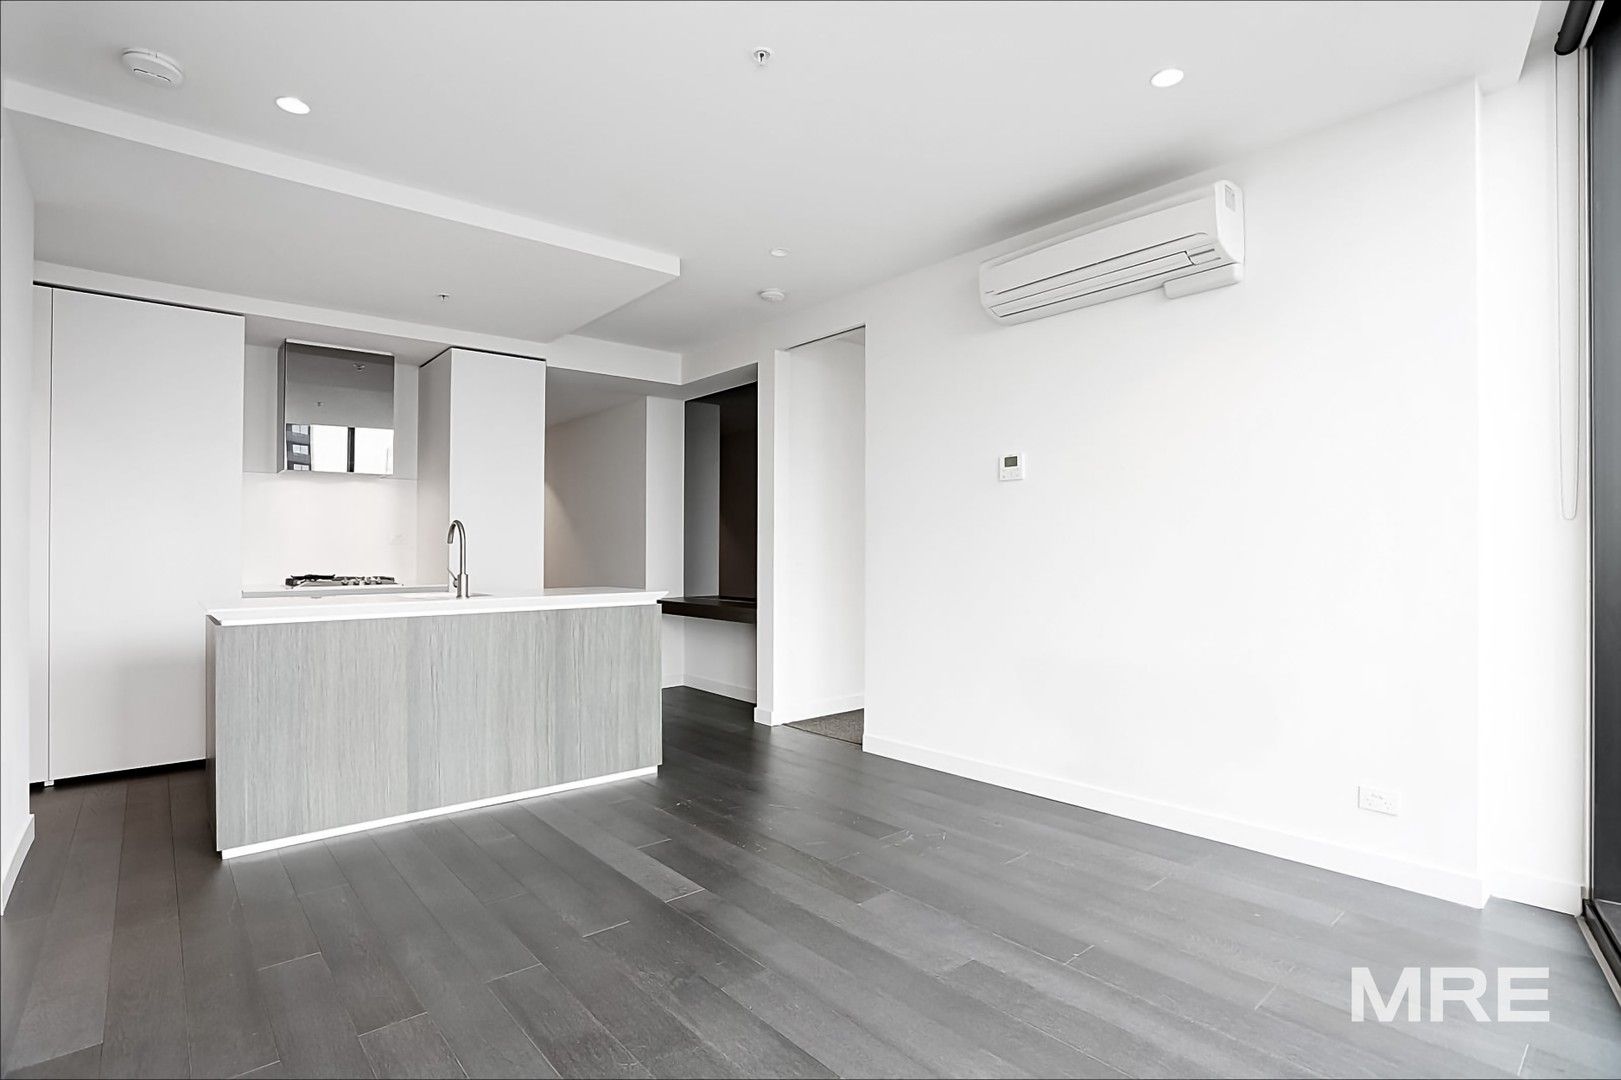 2 bedrooms Apartment / Unit / Flat in 4809/135 A'Beckett Street MELBOURNE VIC, 3000